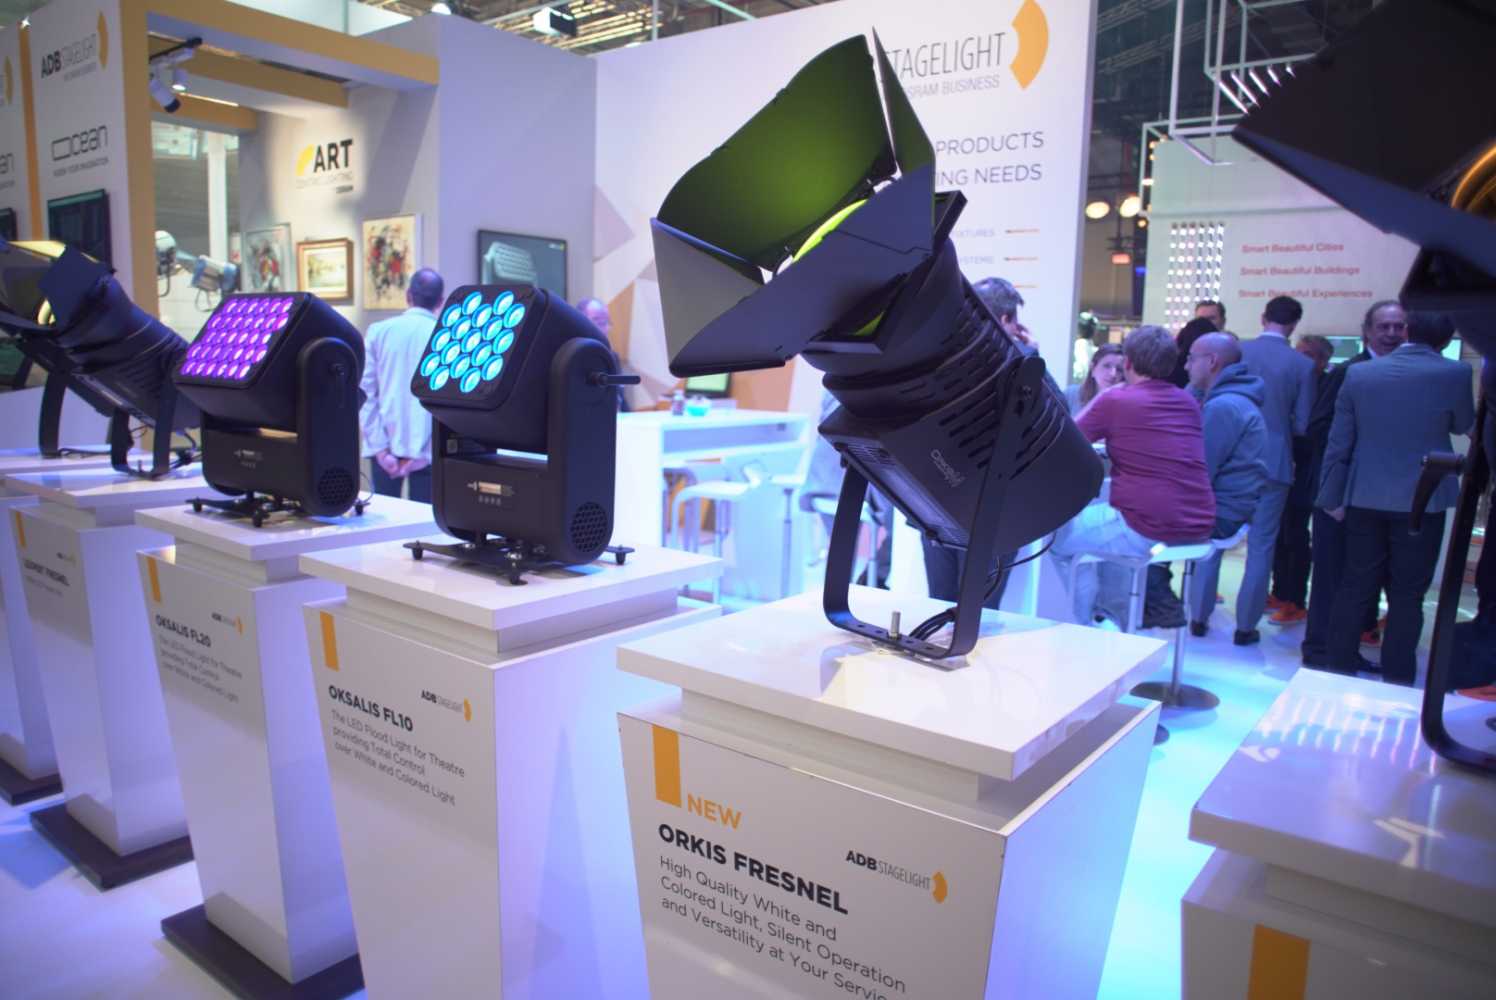 The Orkis is ADB’s new colour LED fresnel